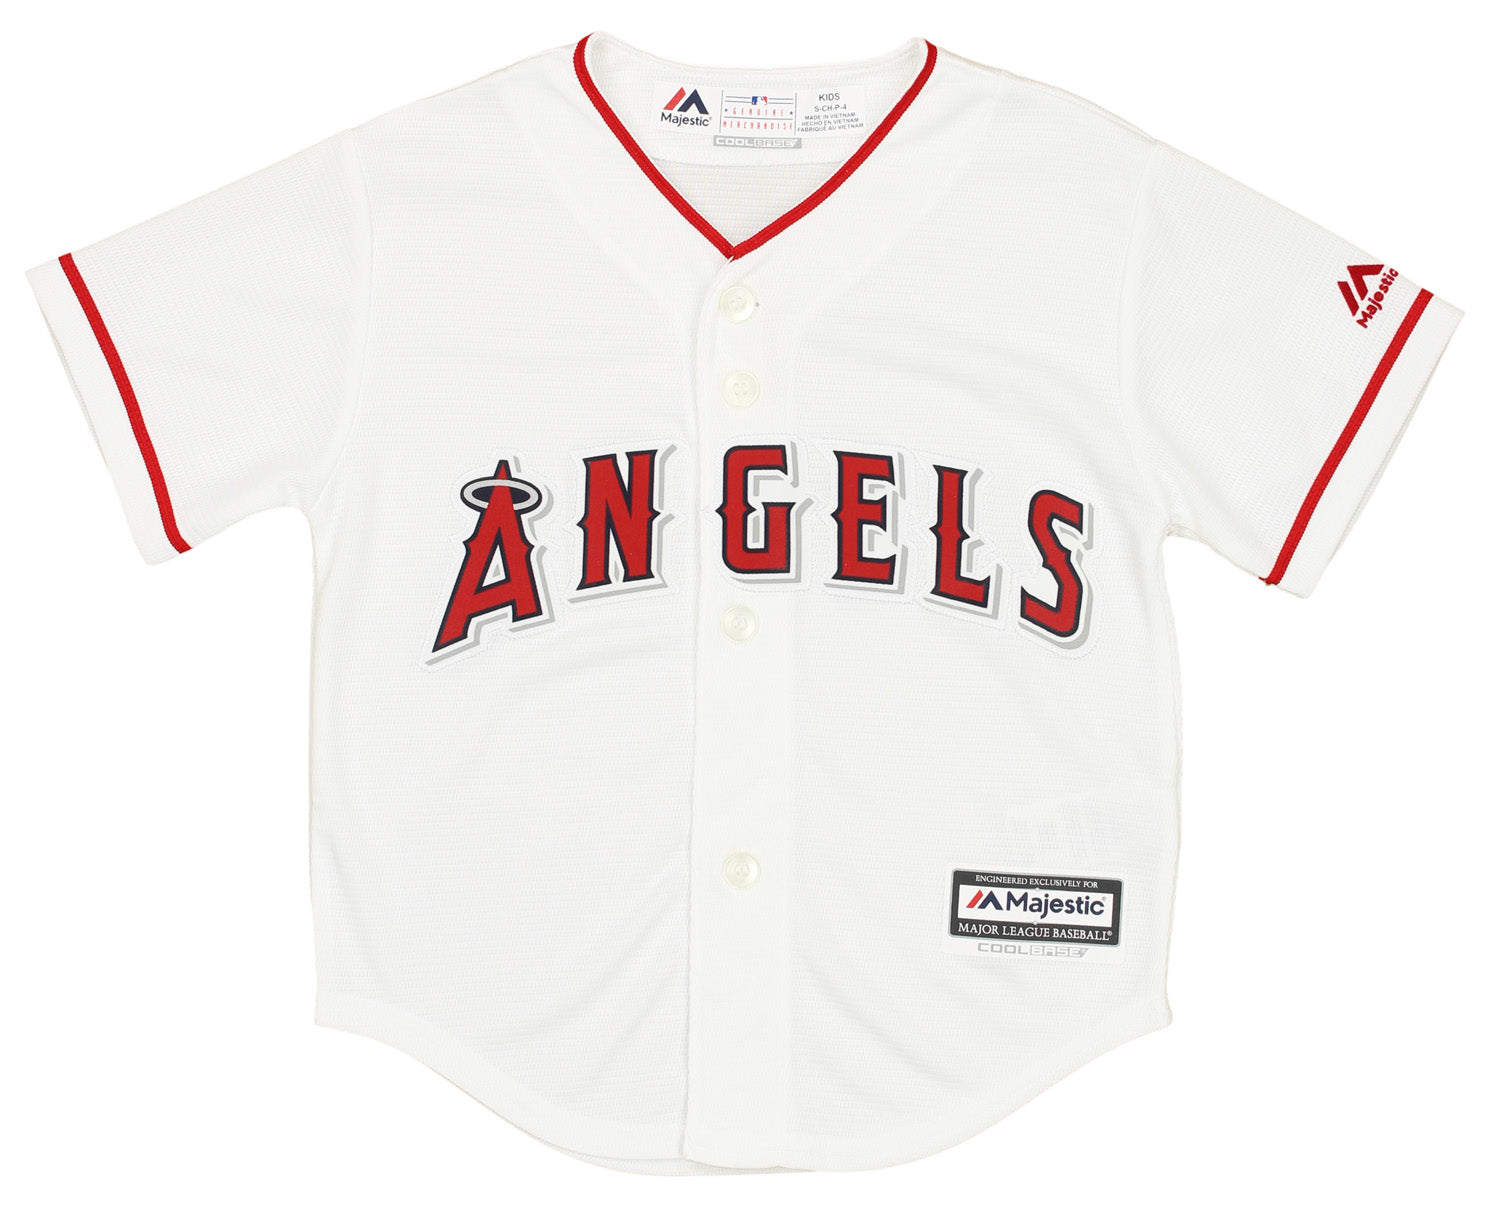 7 angels jersey